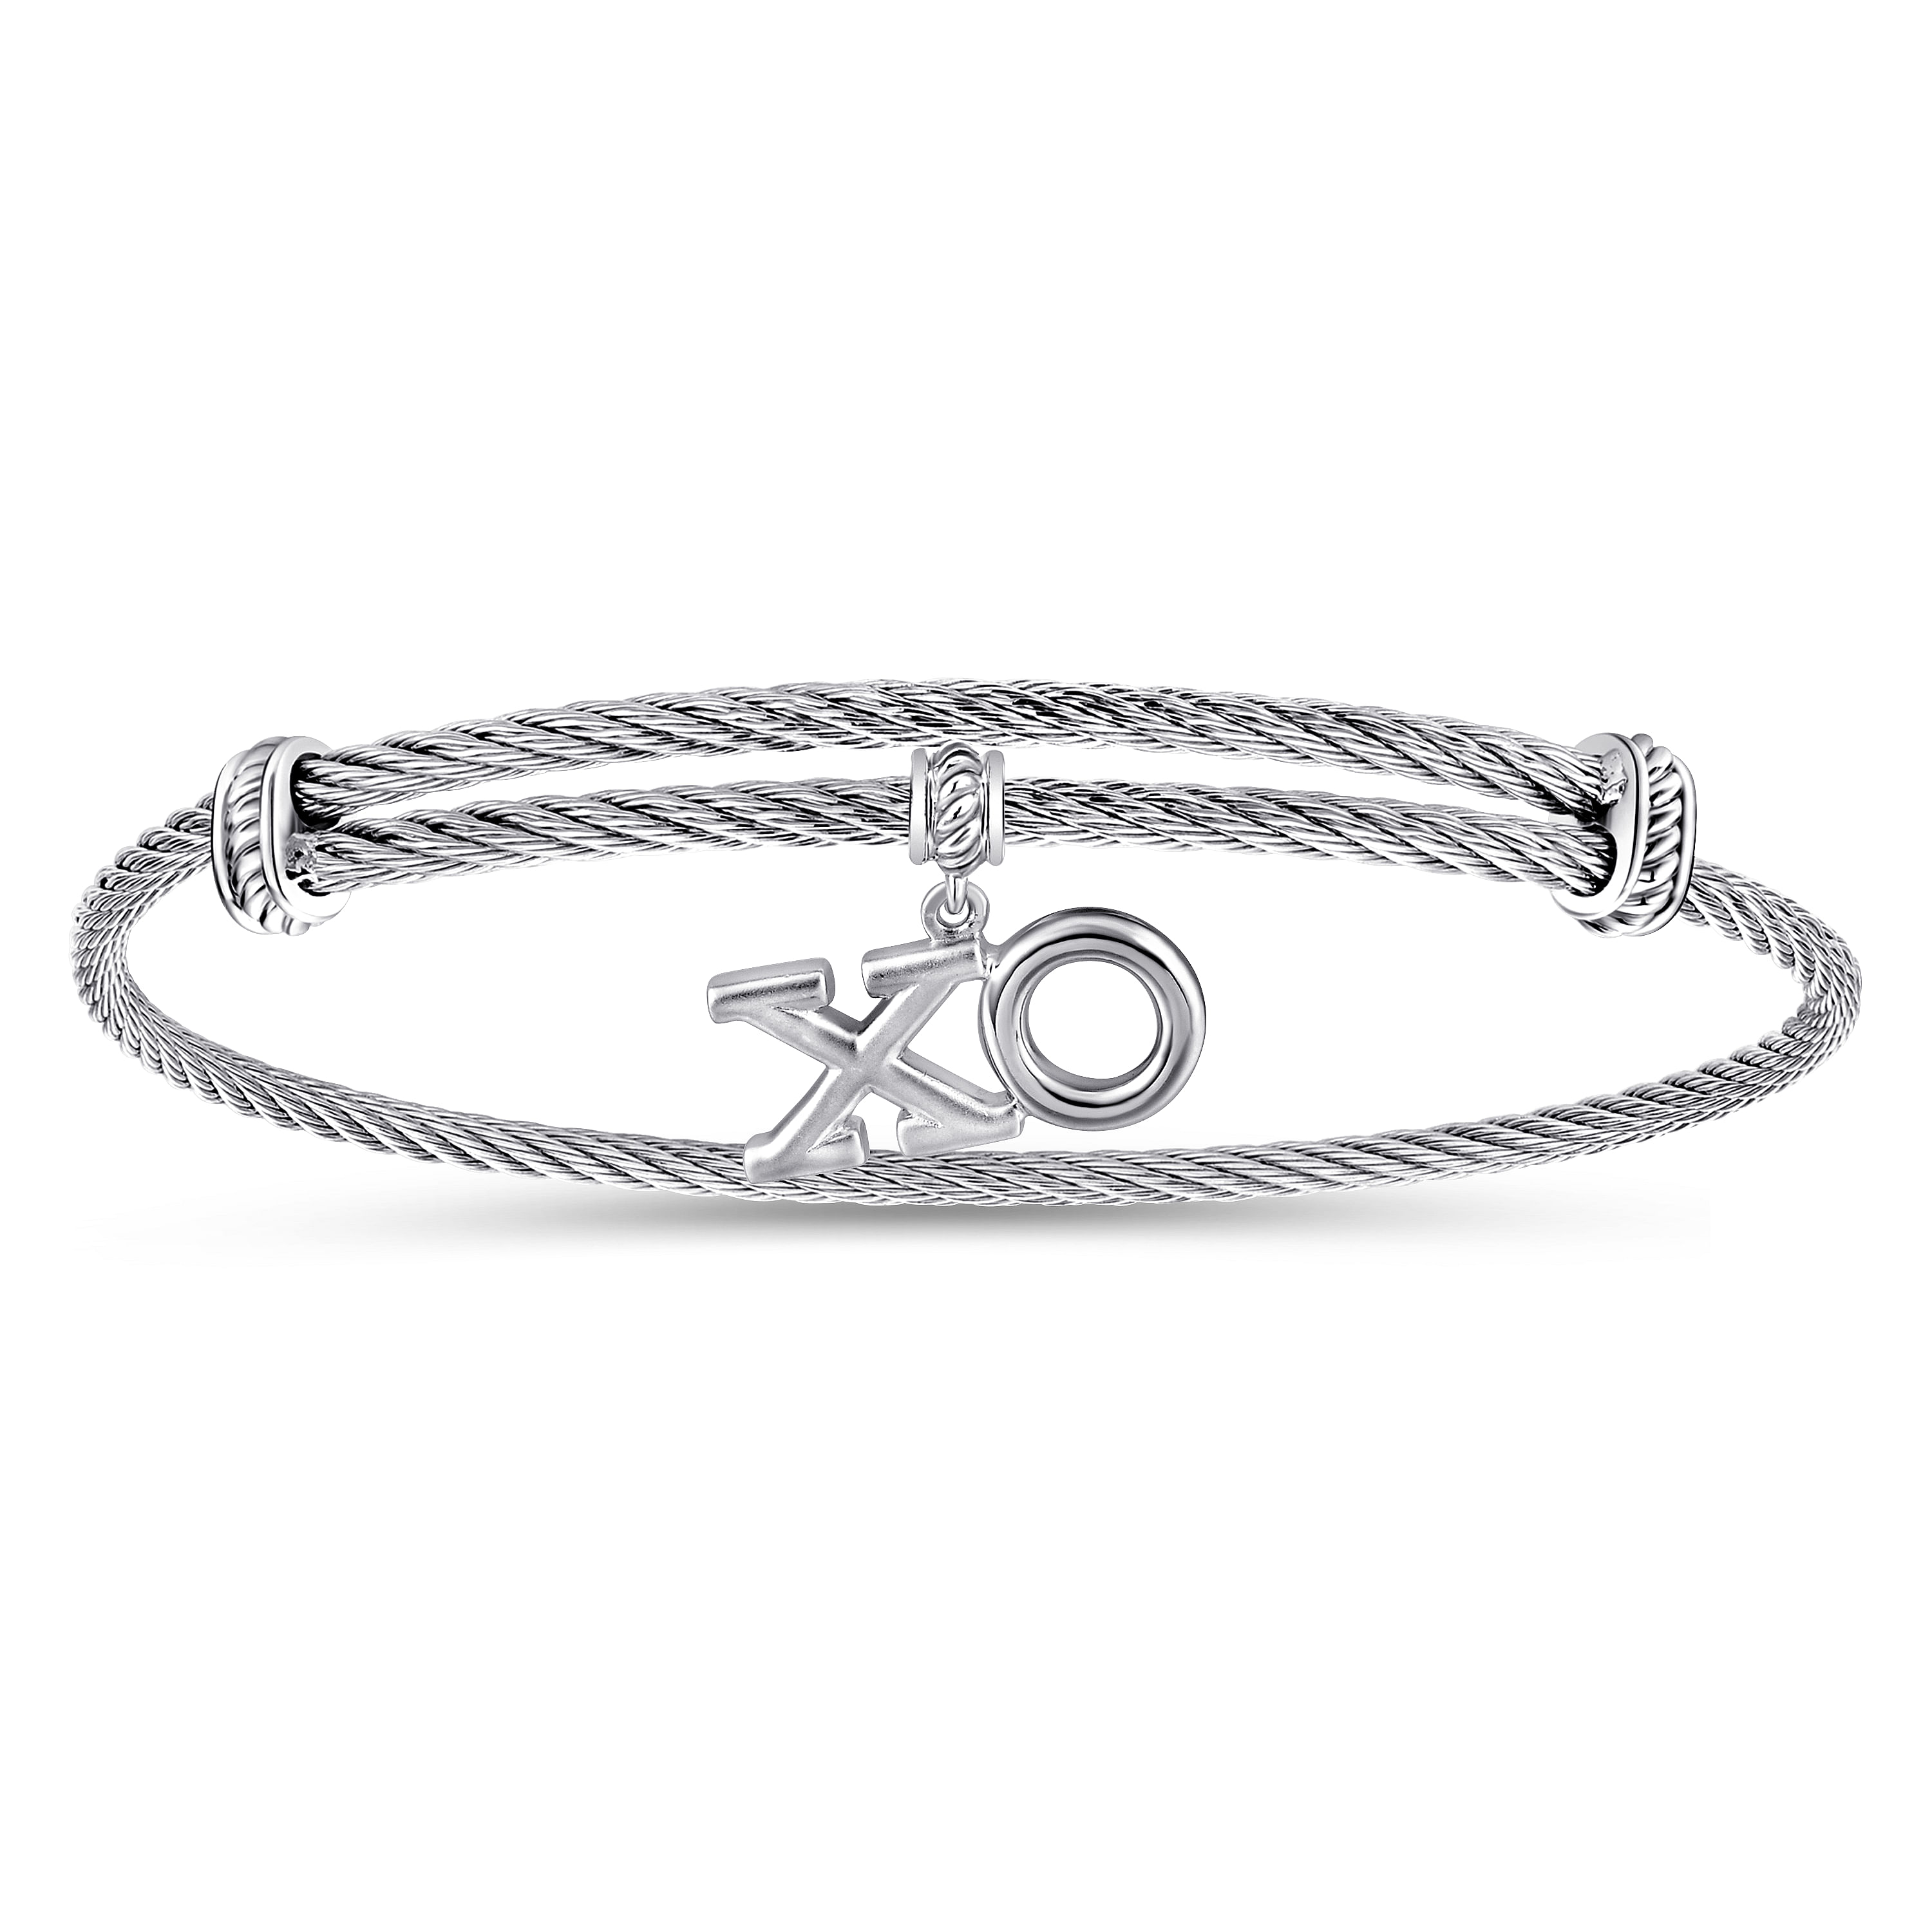 Adjustable Twisted Cable Stainless Steel Bangle with Sterling Silver XO Charm